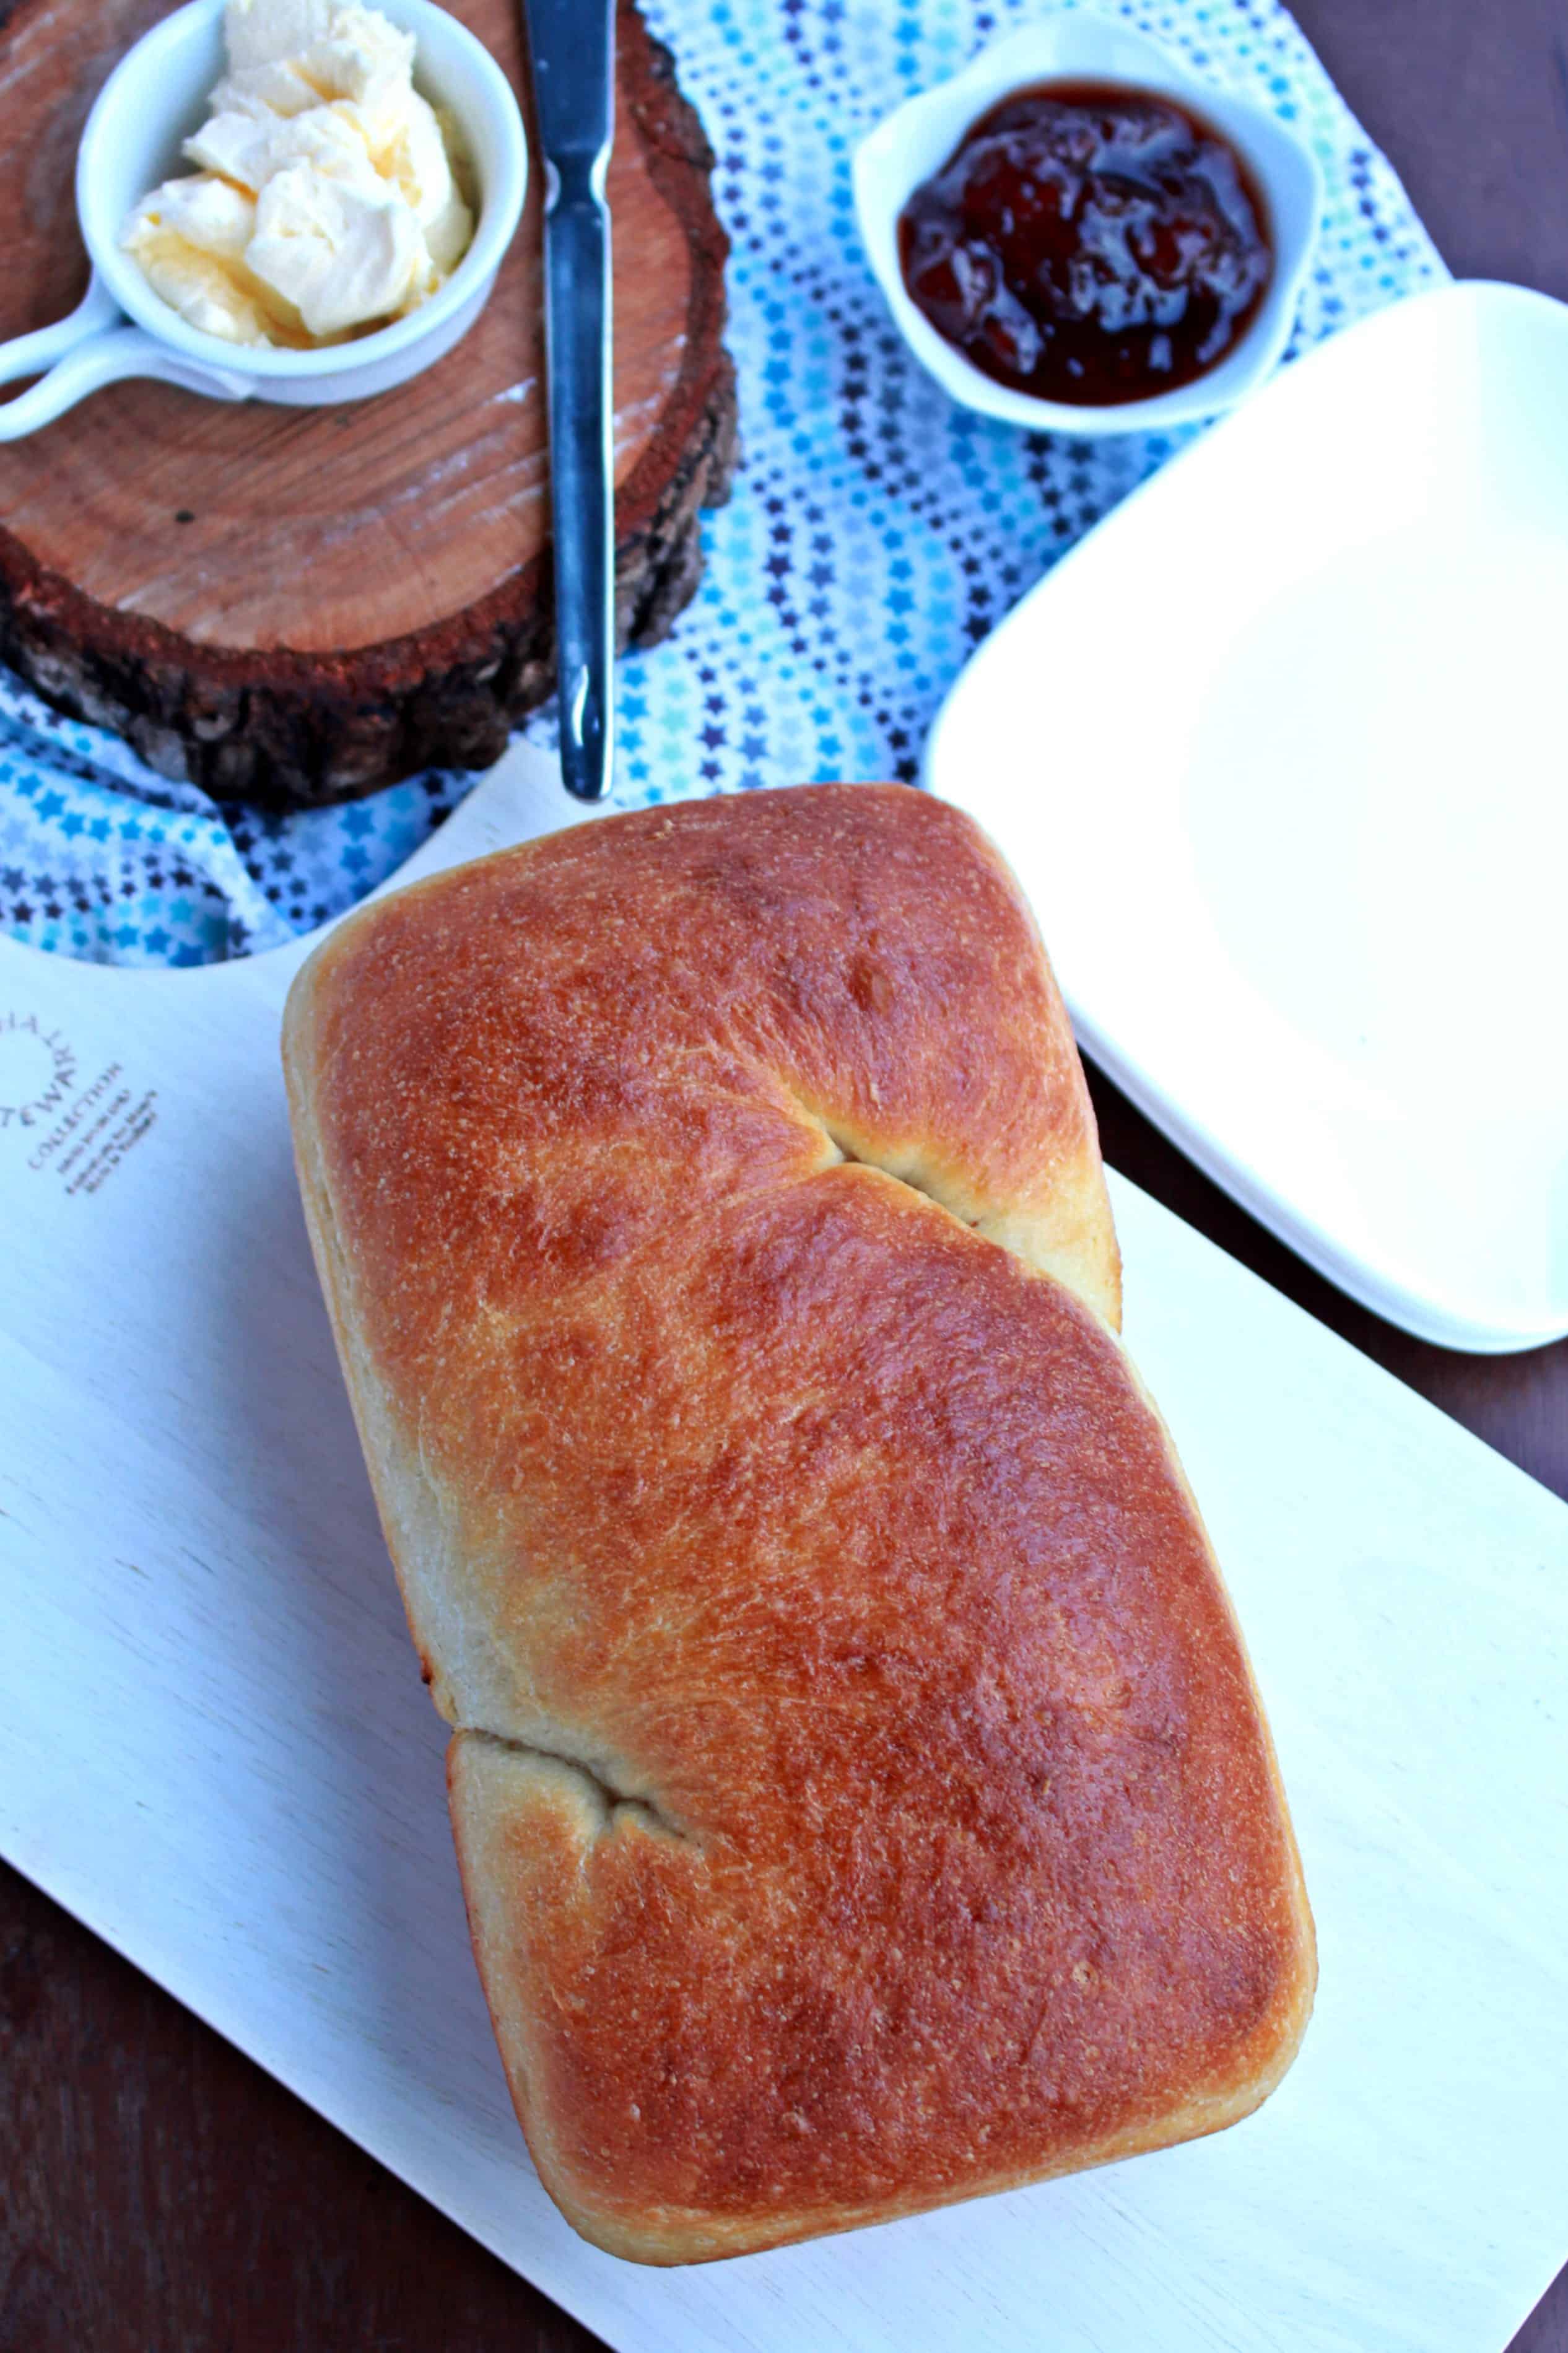 Victorian Milk Bread with butter and spread